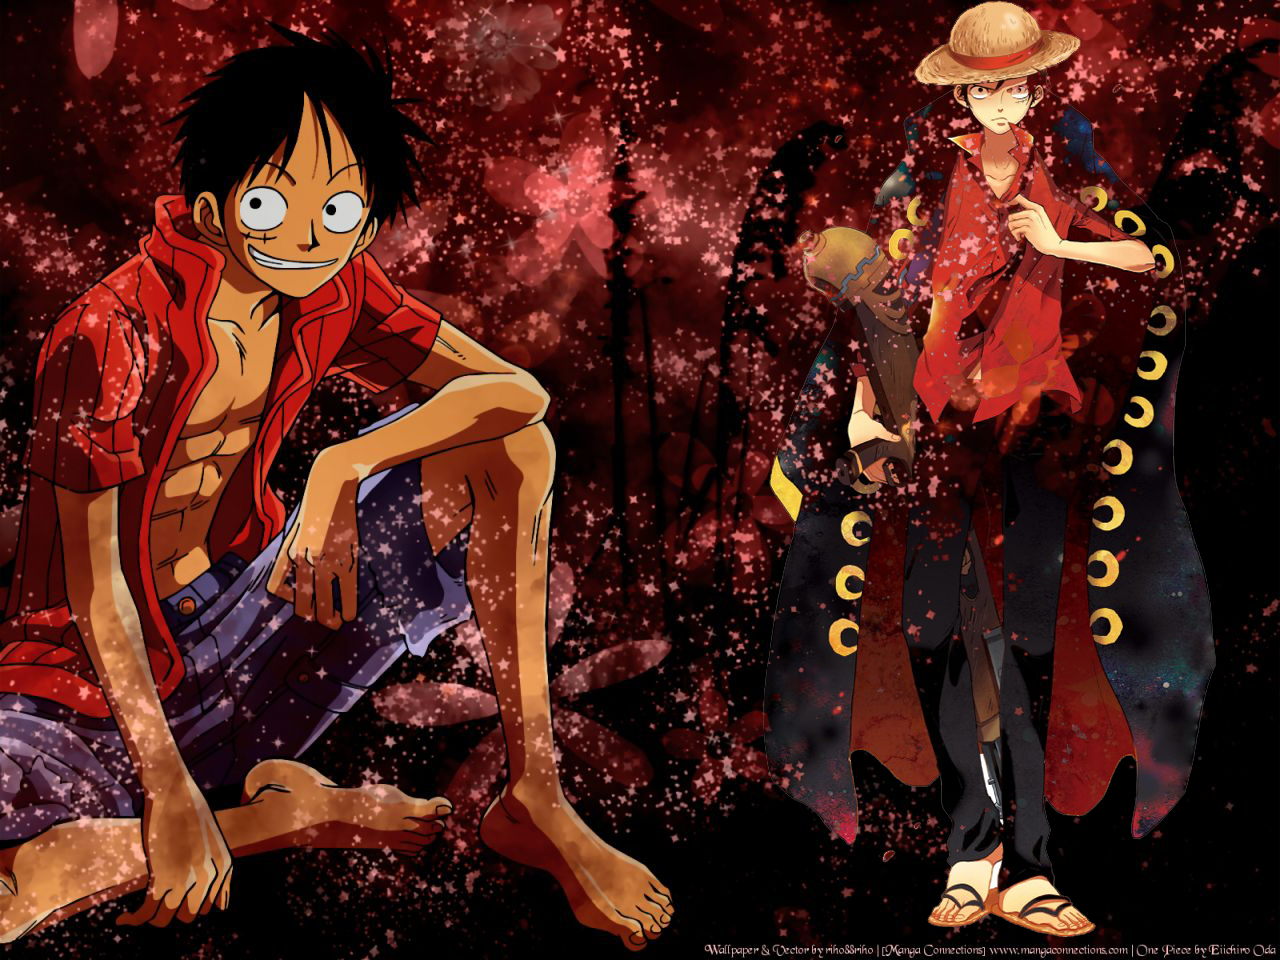 Cool Wallpapers For You Some Coo Of Luffy Wallpapers.